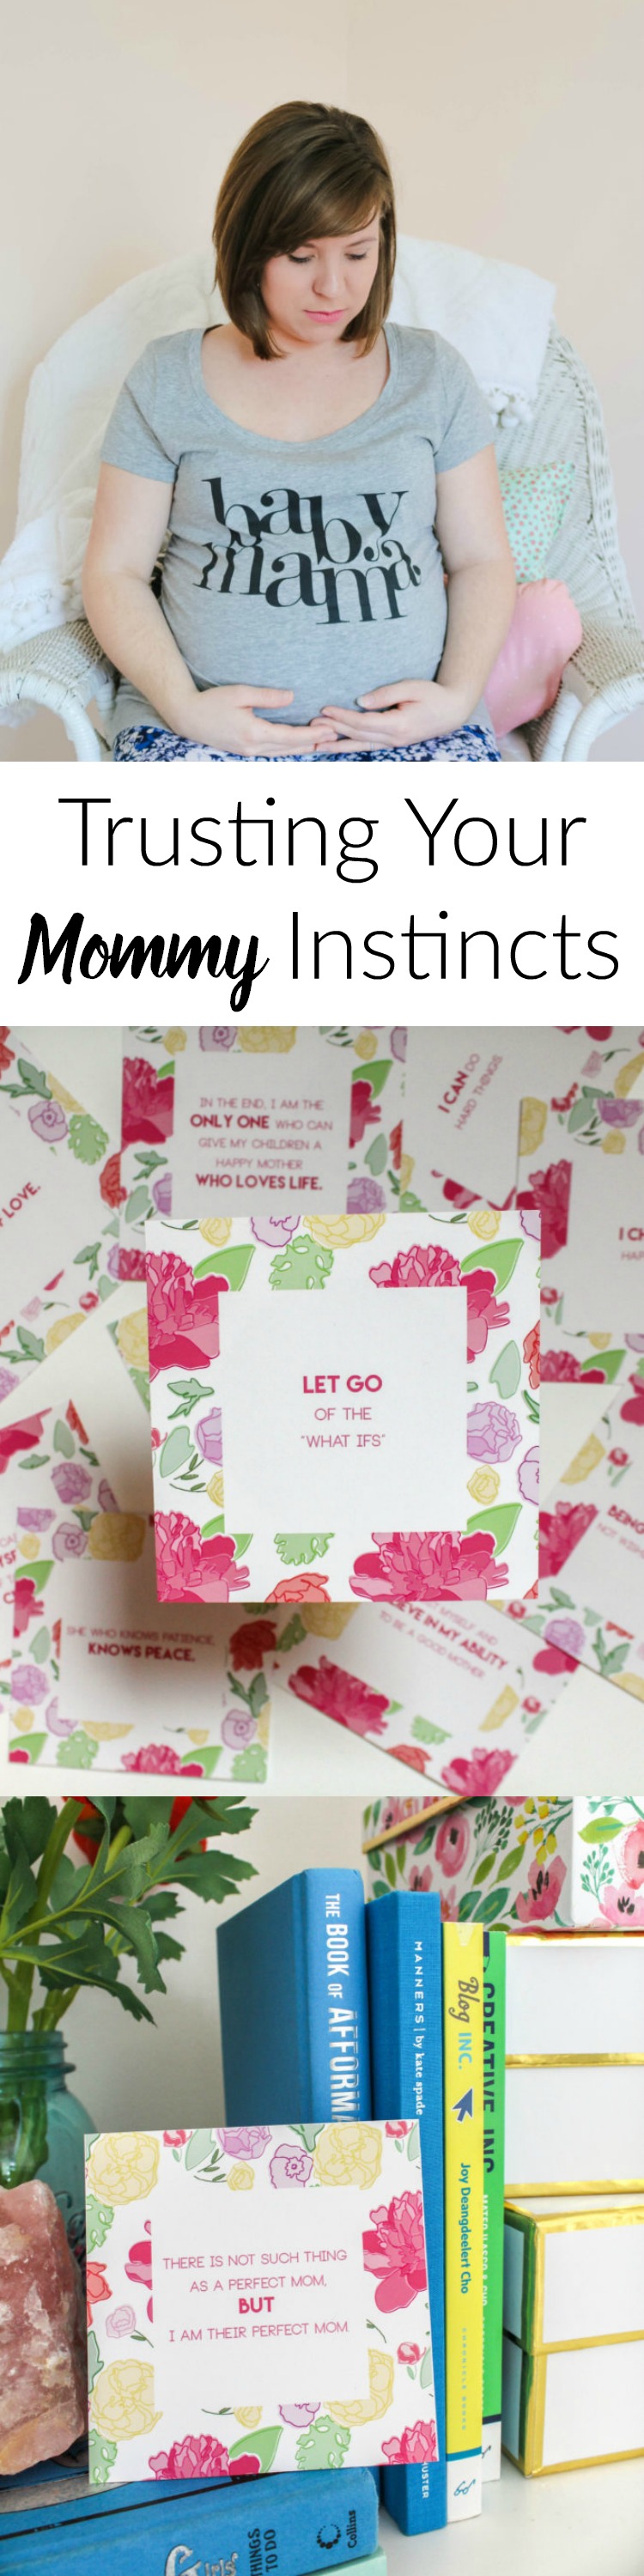 Trusting Your Mommy Instincts- Such a great encouraging post for new moms. Super cute free printable!